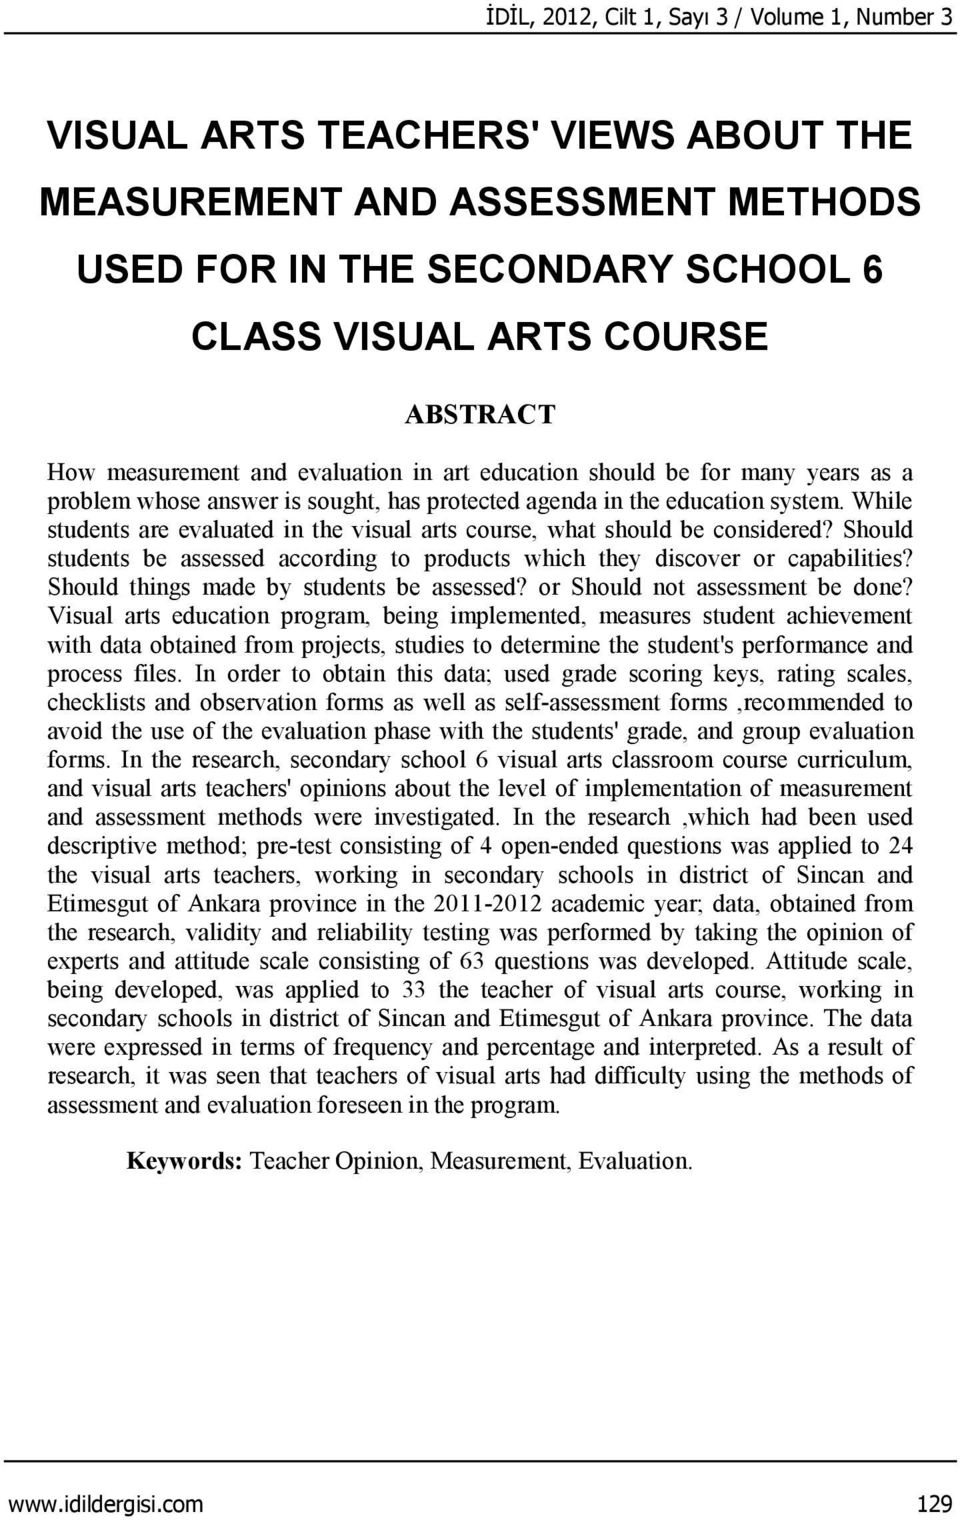 While students are evaluated in the visual arts course, what should be considered? Should students be assessed according to products which they discover or capabilities?